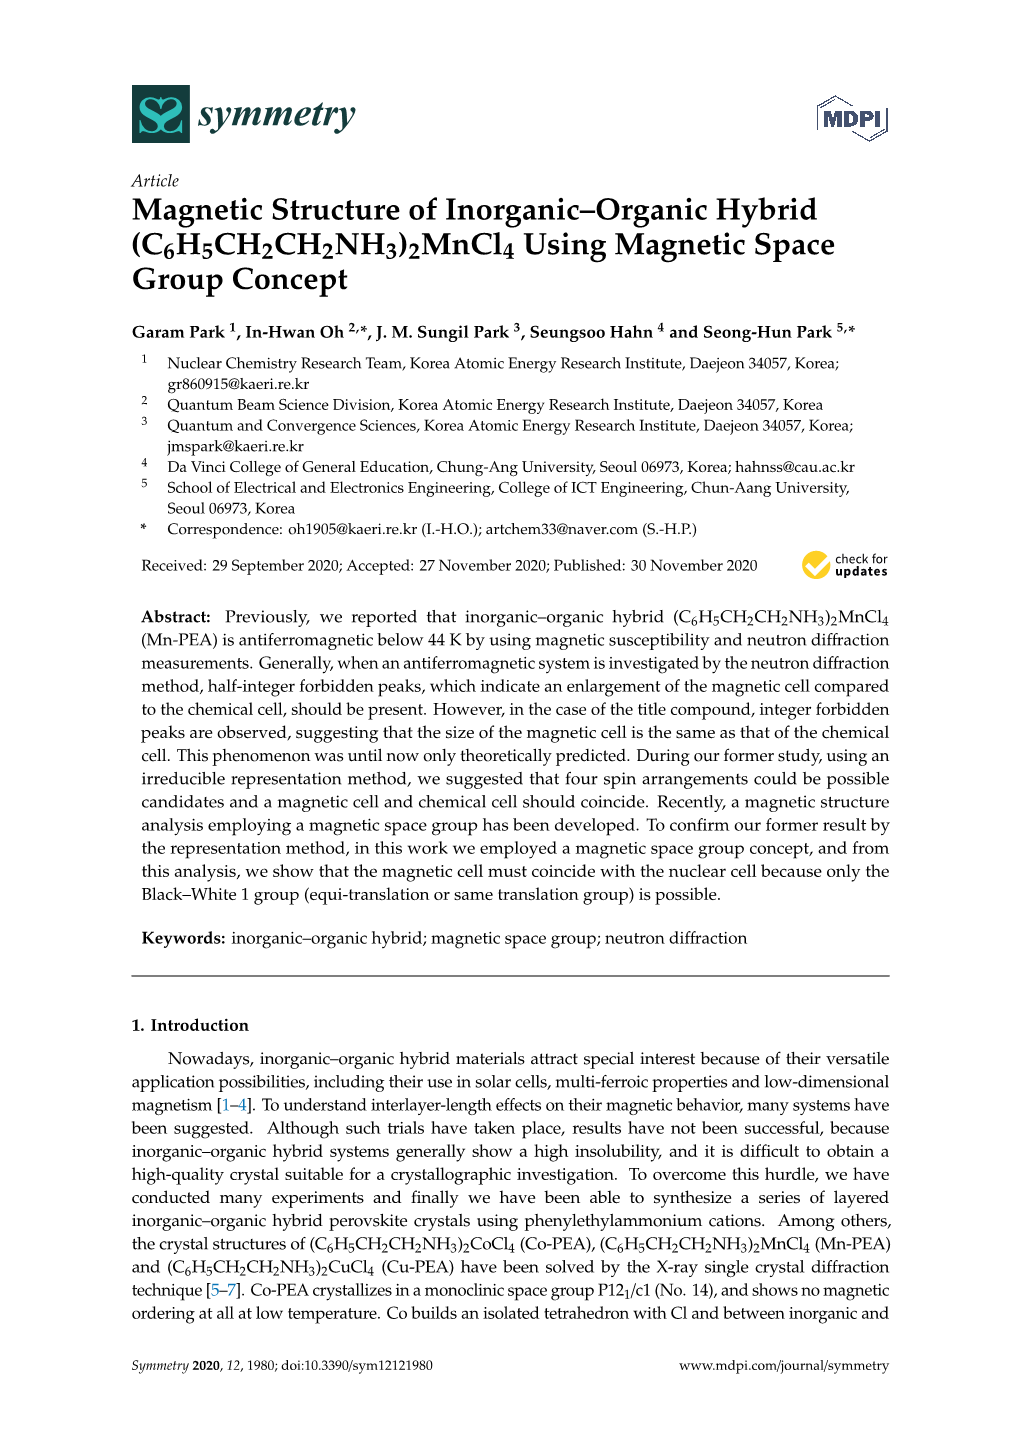 Magnetic Structure of Inorganic–Organic Hybrid (C6H5CH2CH2NH3)2Mncl4 Using Magnetic Space Group Concept